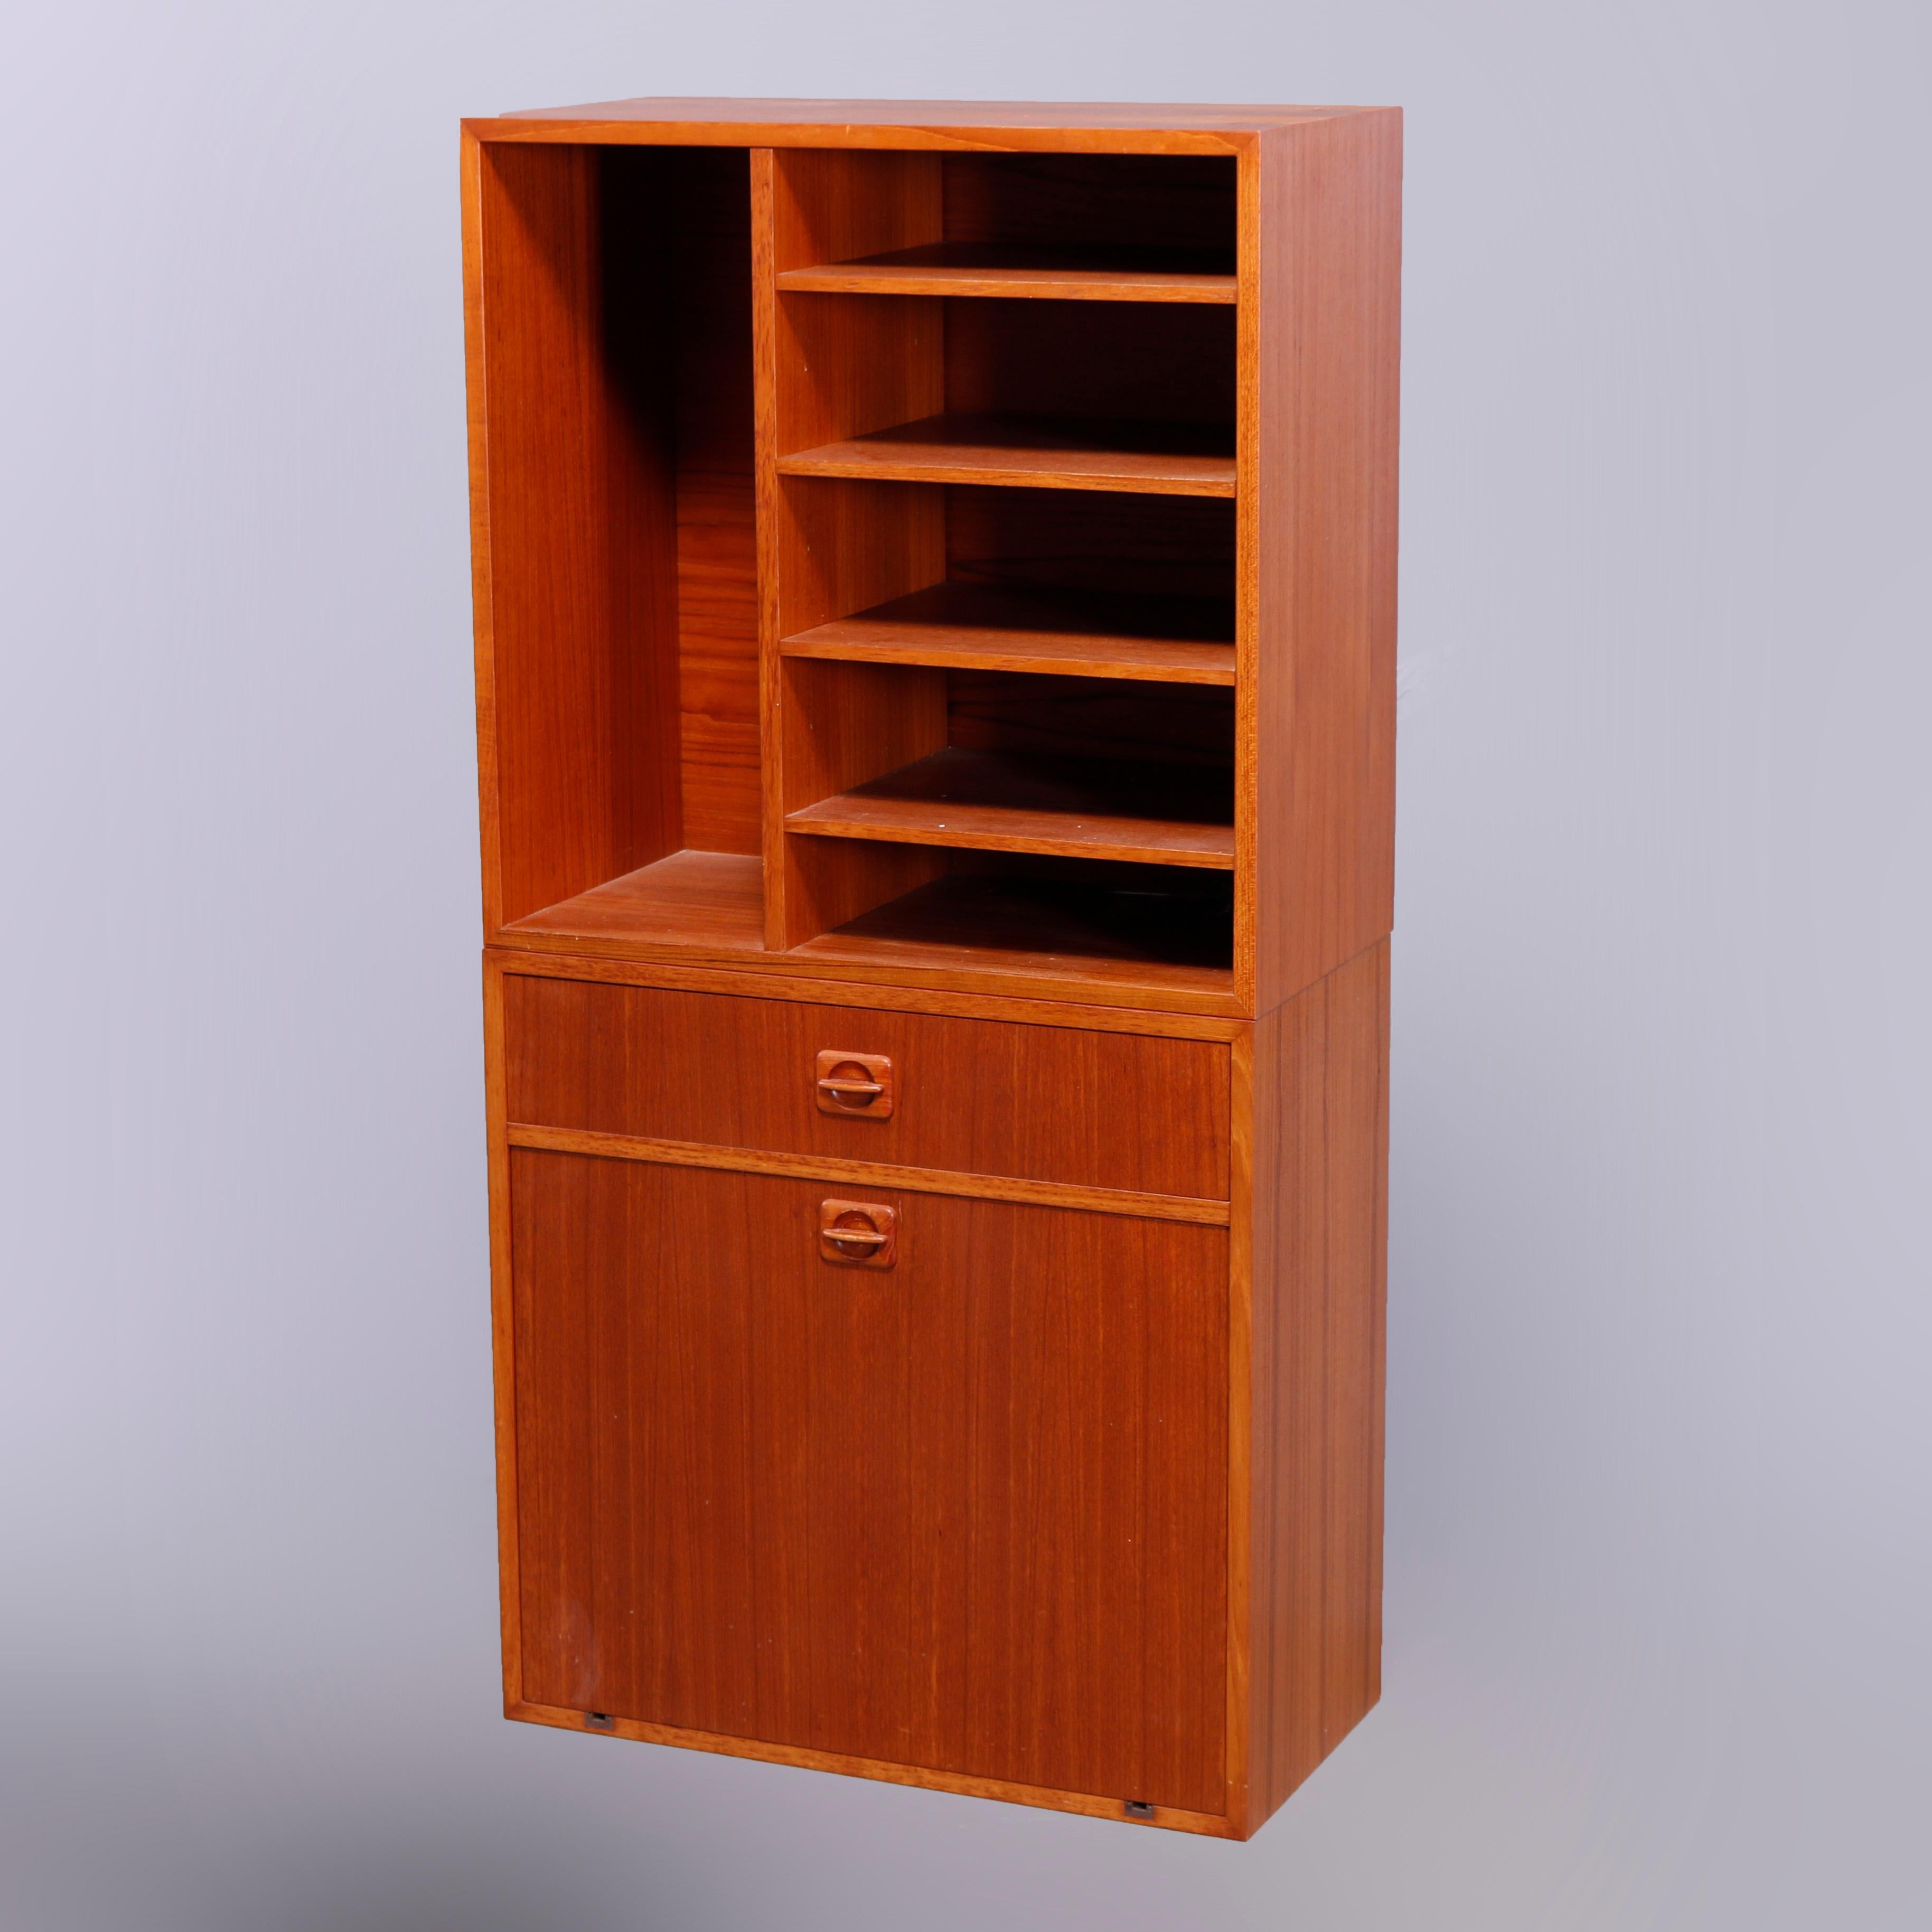 A Mid Century Modern cabinet offers teakwood construction with upper having open shelving over lower with single drawer and drop down cabinet opening to a mirrored interior, en verso Made in Denmark label, c1960

Measures - overall 47.5''H x